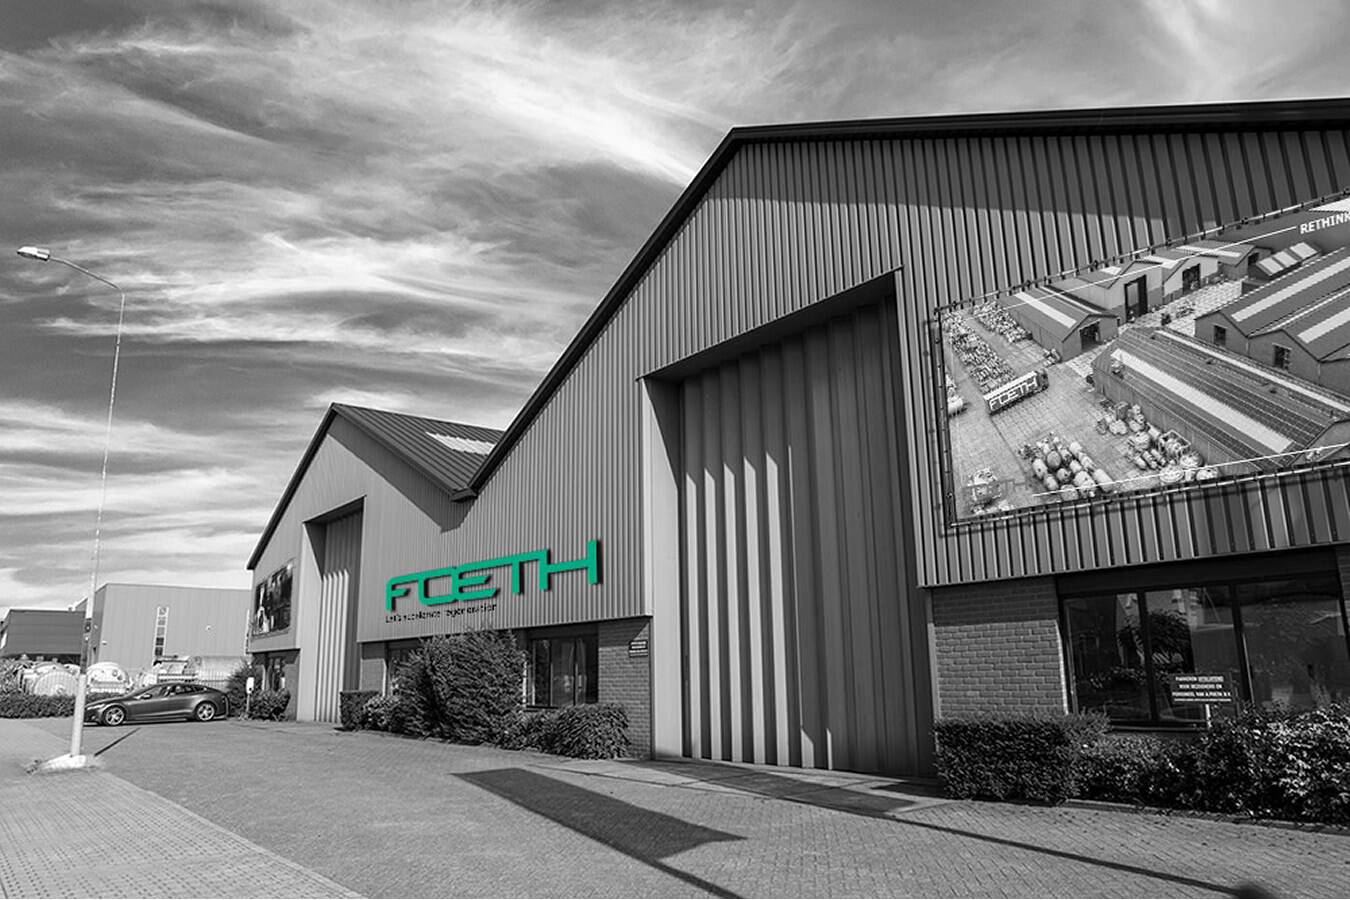 Foeth unveils new brand identity and introduces new CEO Foeth, a driving force in process machine circularity for over 100 years, reveals its revamped brand identity with an entirely new look today. Positioned for the future, led by the new CEO Michiel Schreurs.